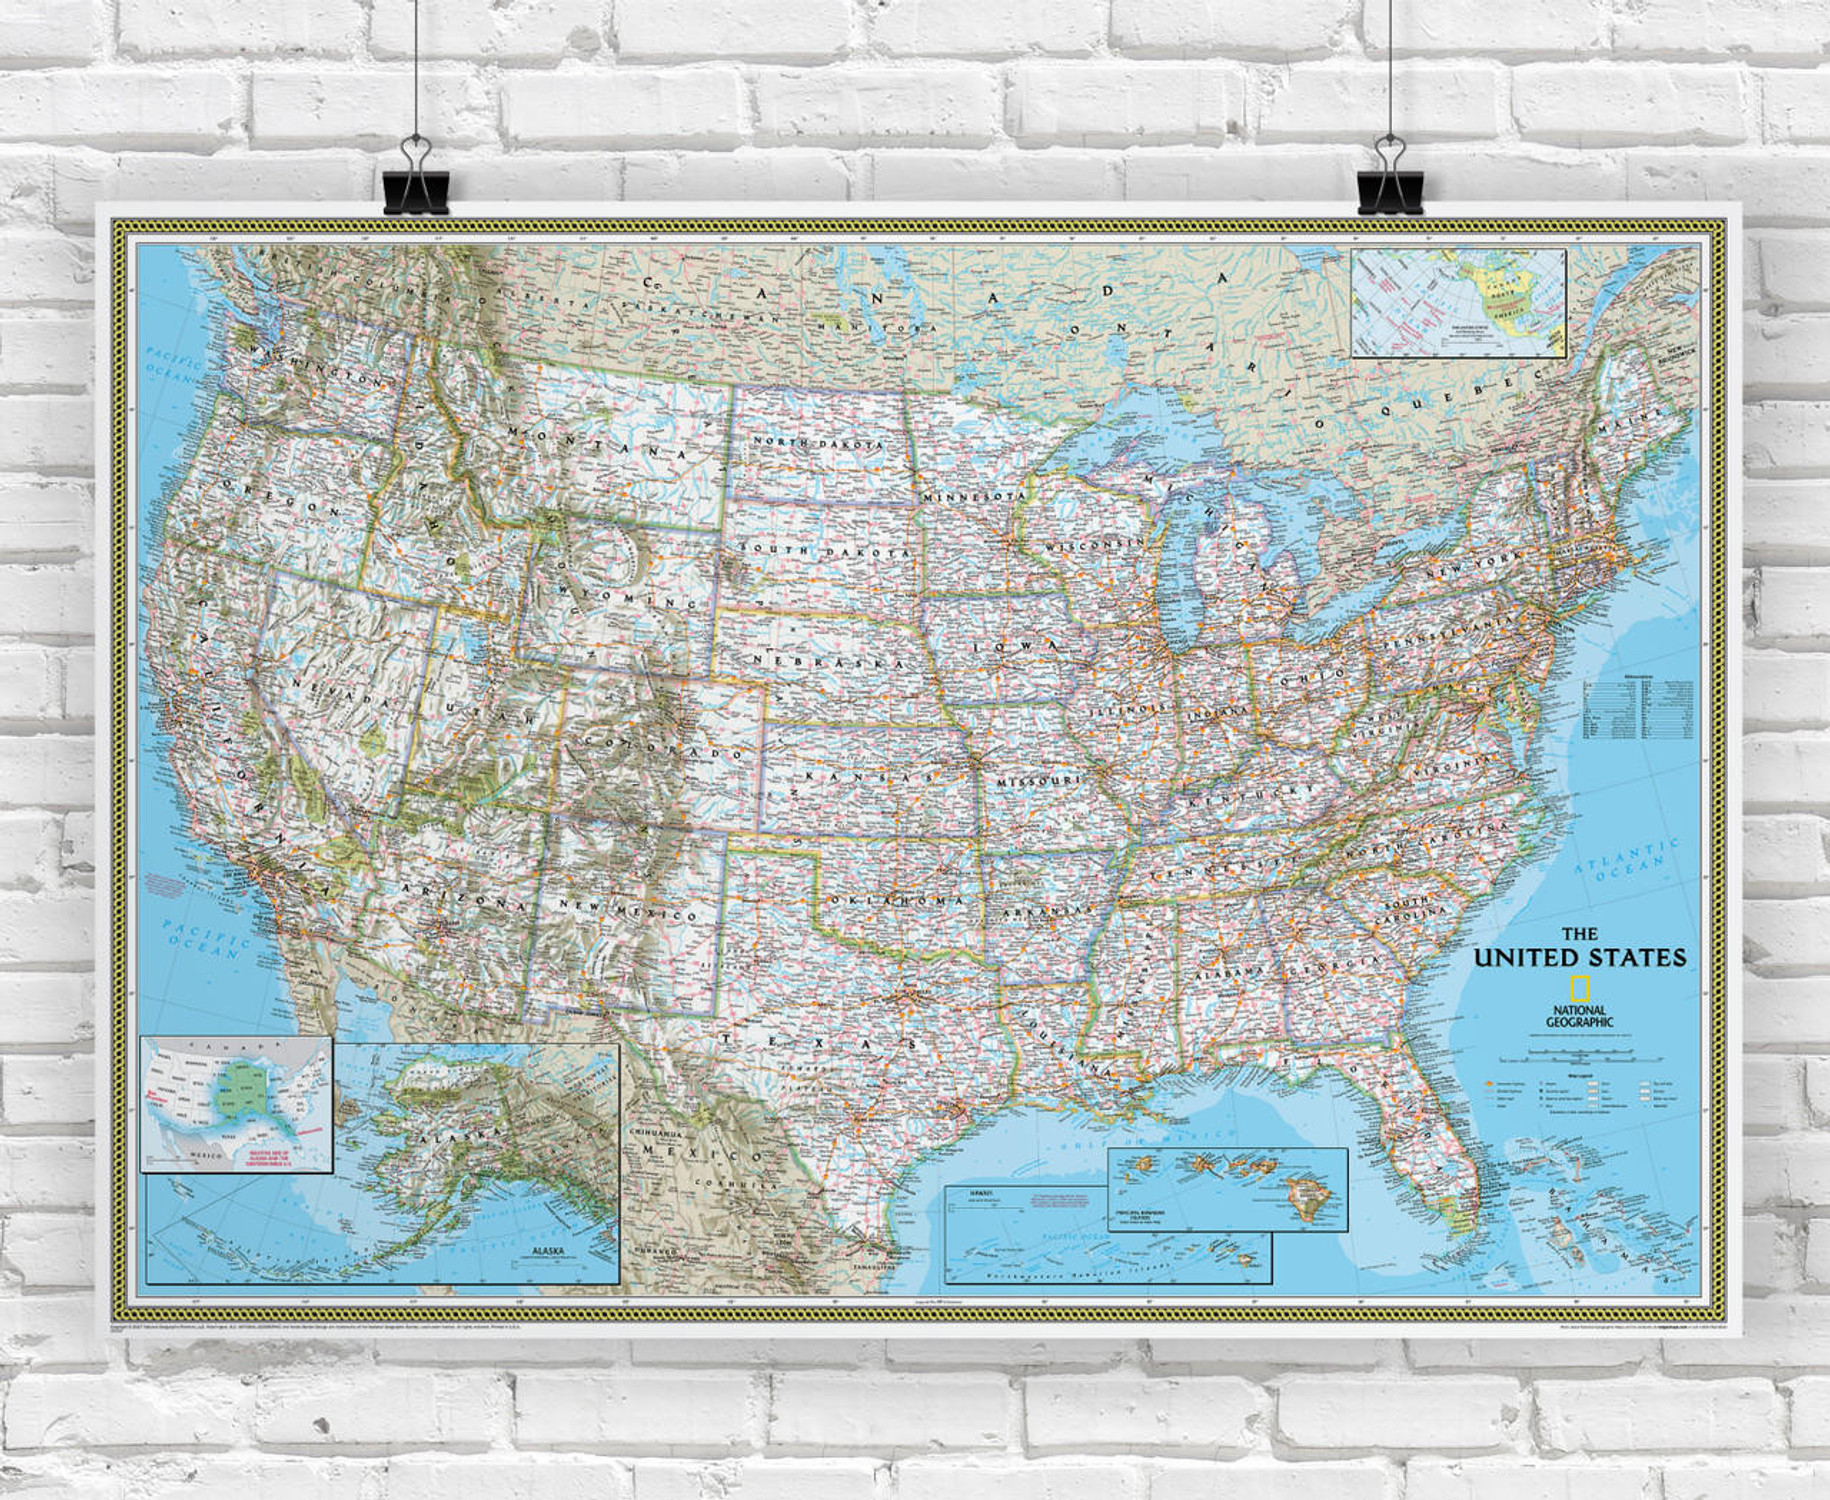 National Geographic United States Classic Political Wall Map, image 1, World Maps Online